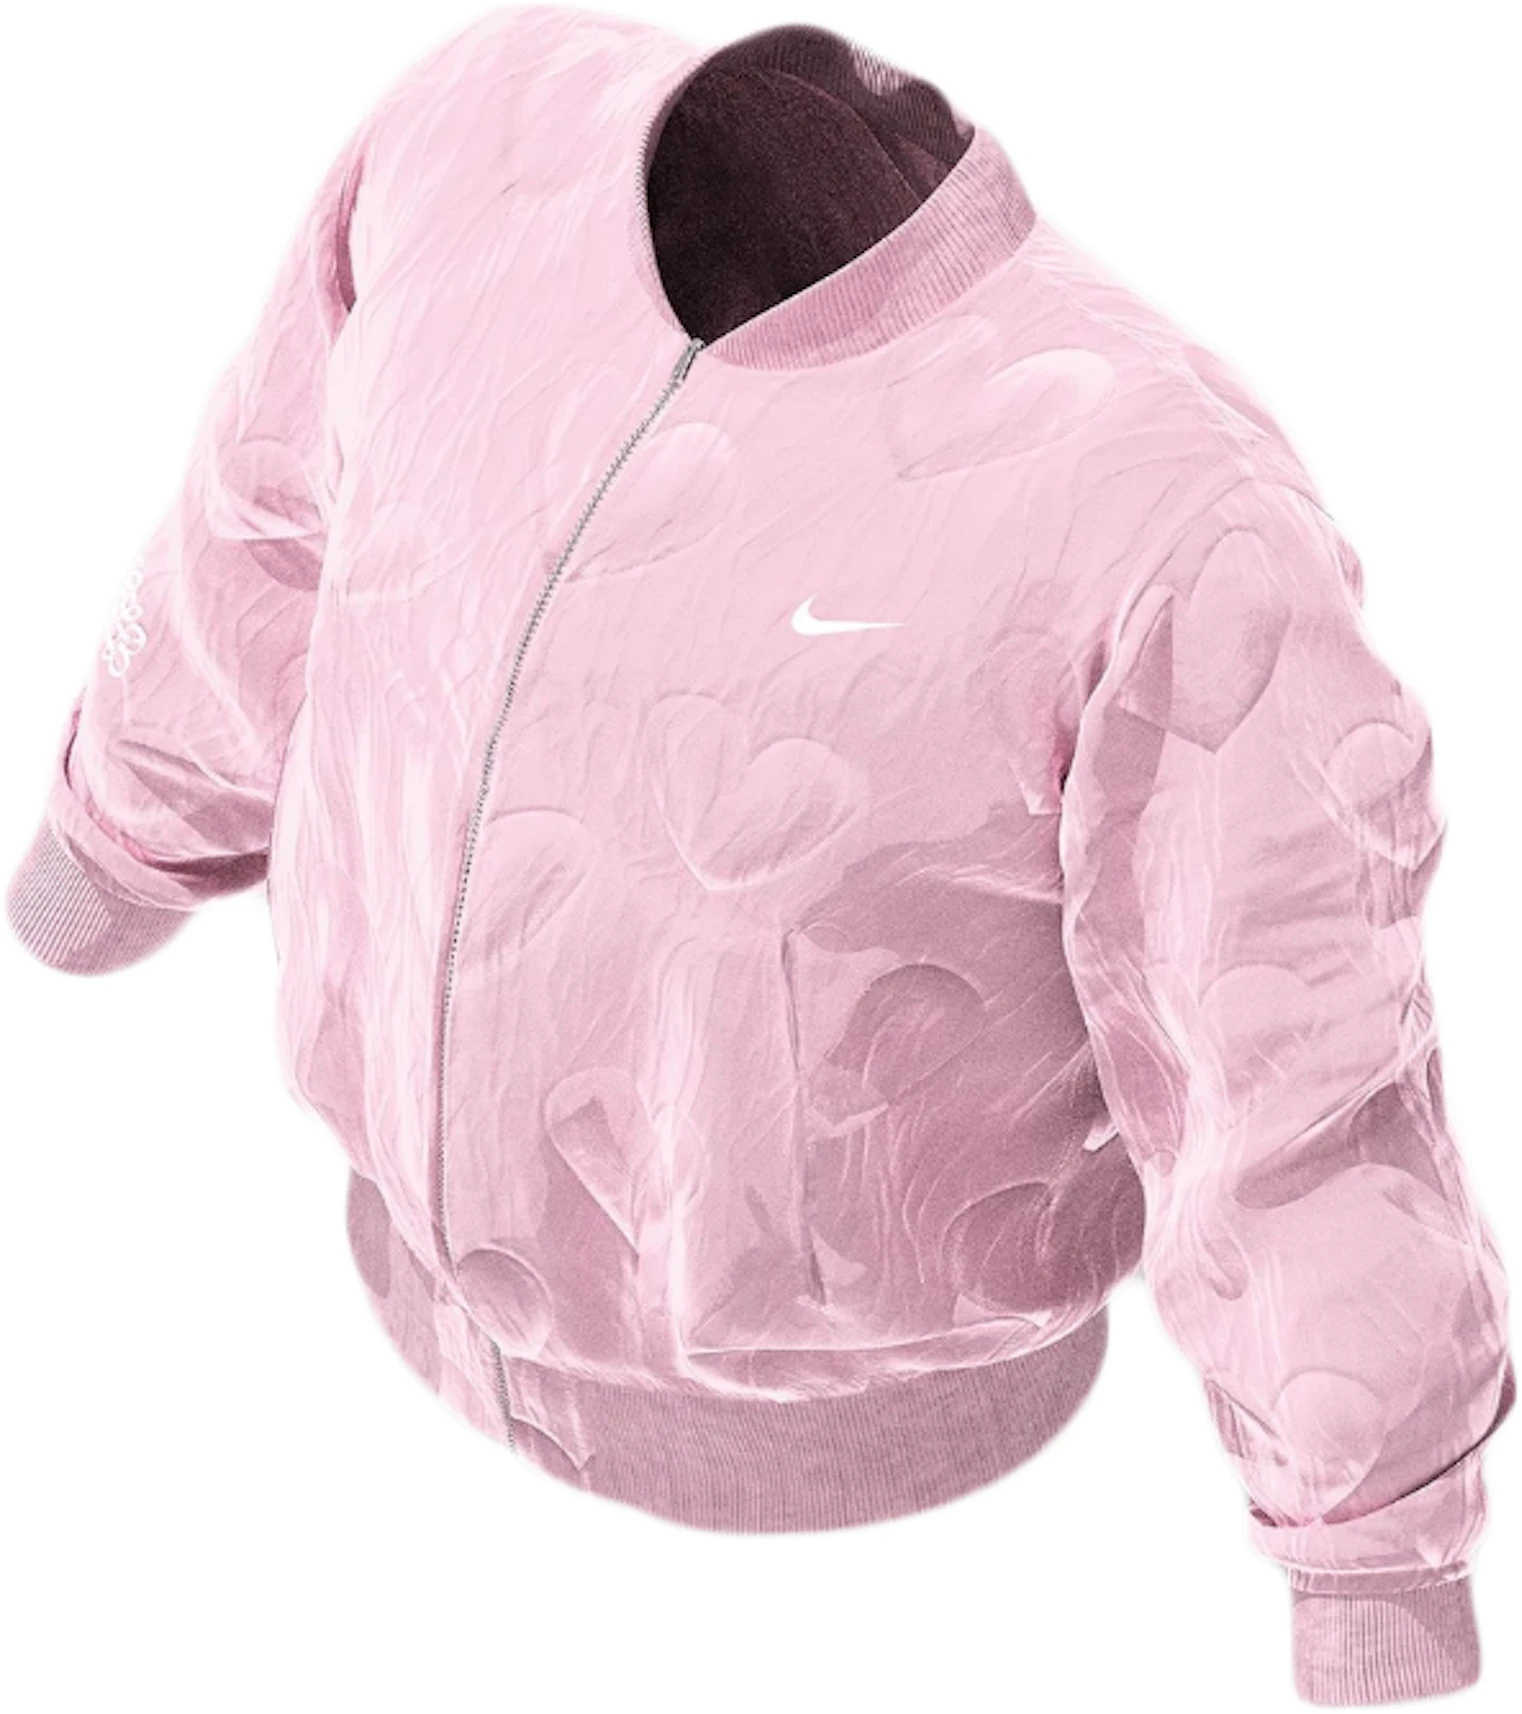 x Drake Certified Boy Bomber Jacket (Friends and Family) Pink - FW20 -